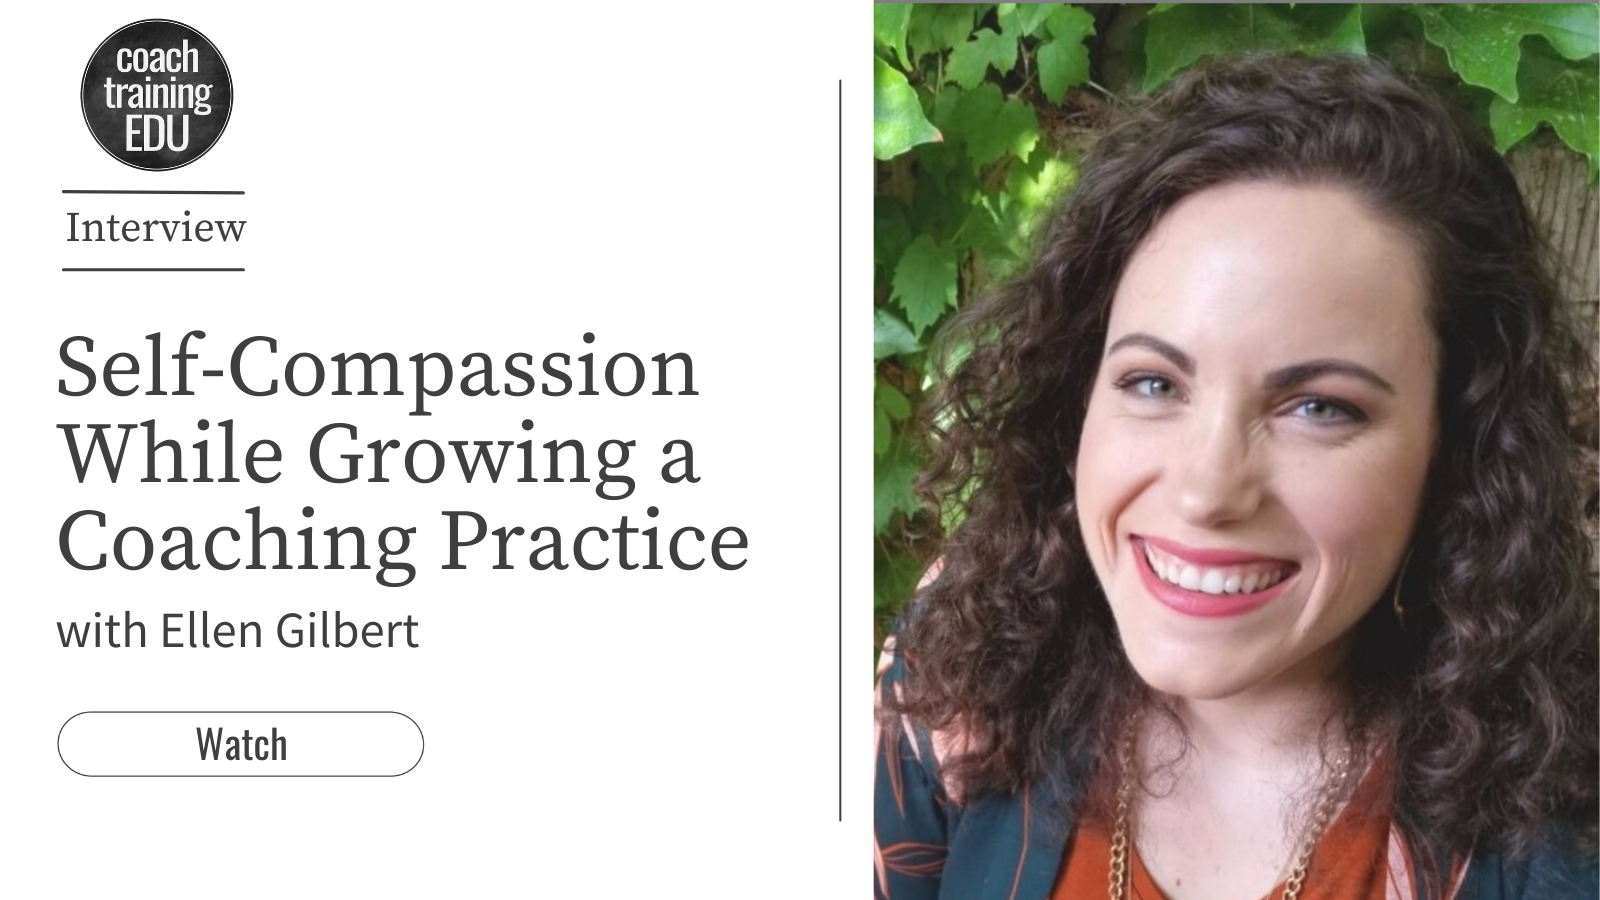 Self-Compassion While Growing a Coaching Practice with Ellen Gilbert